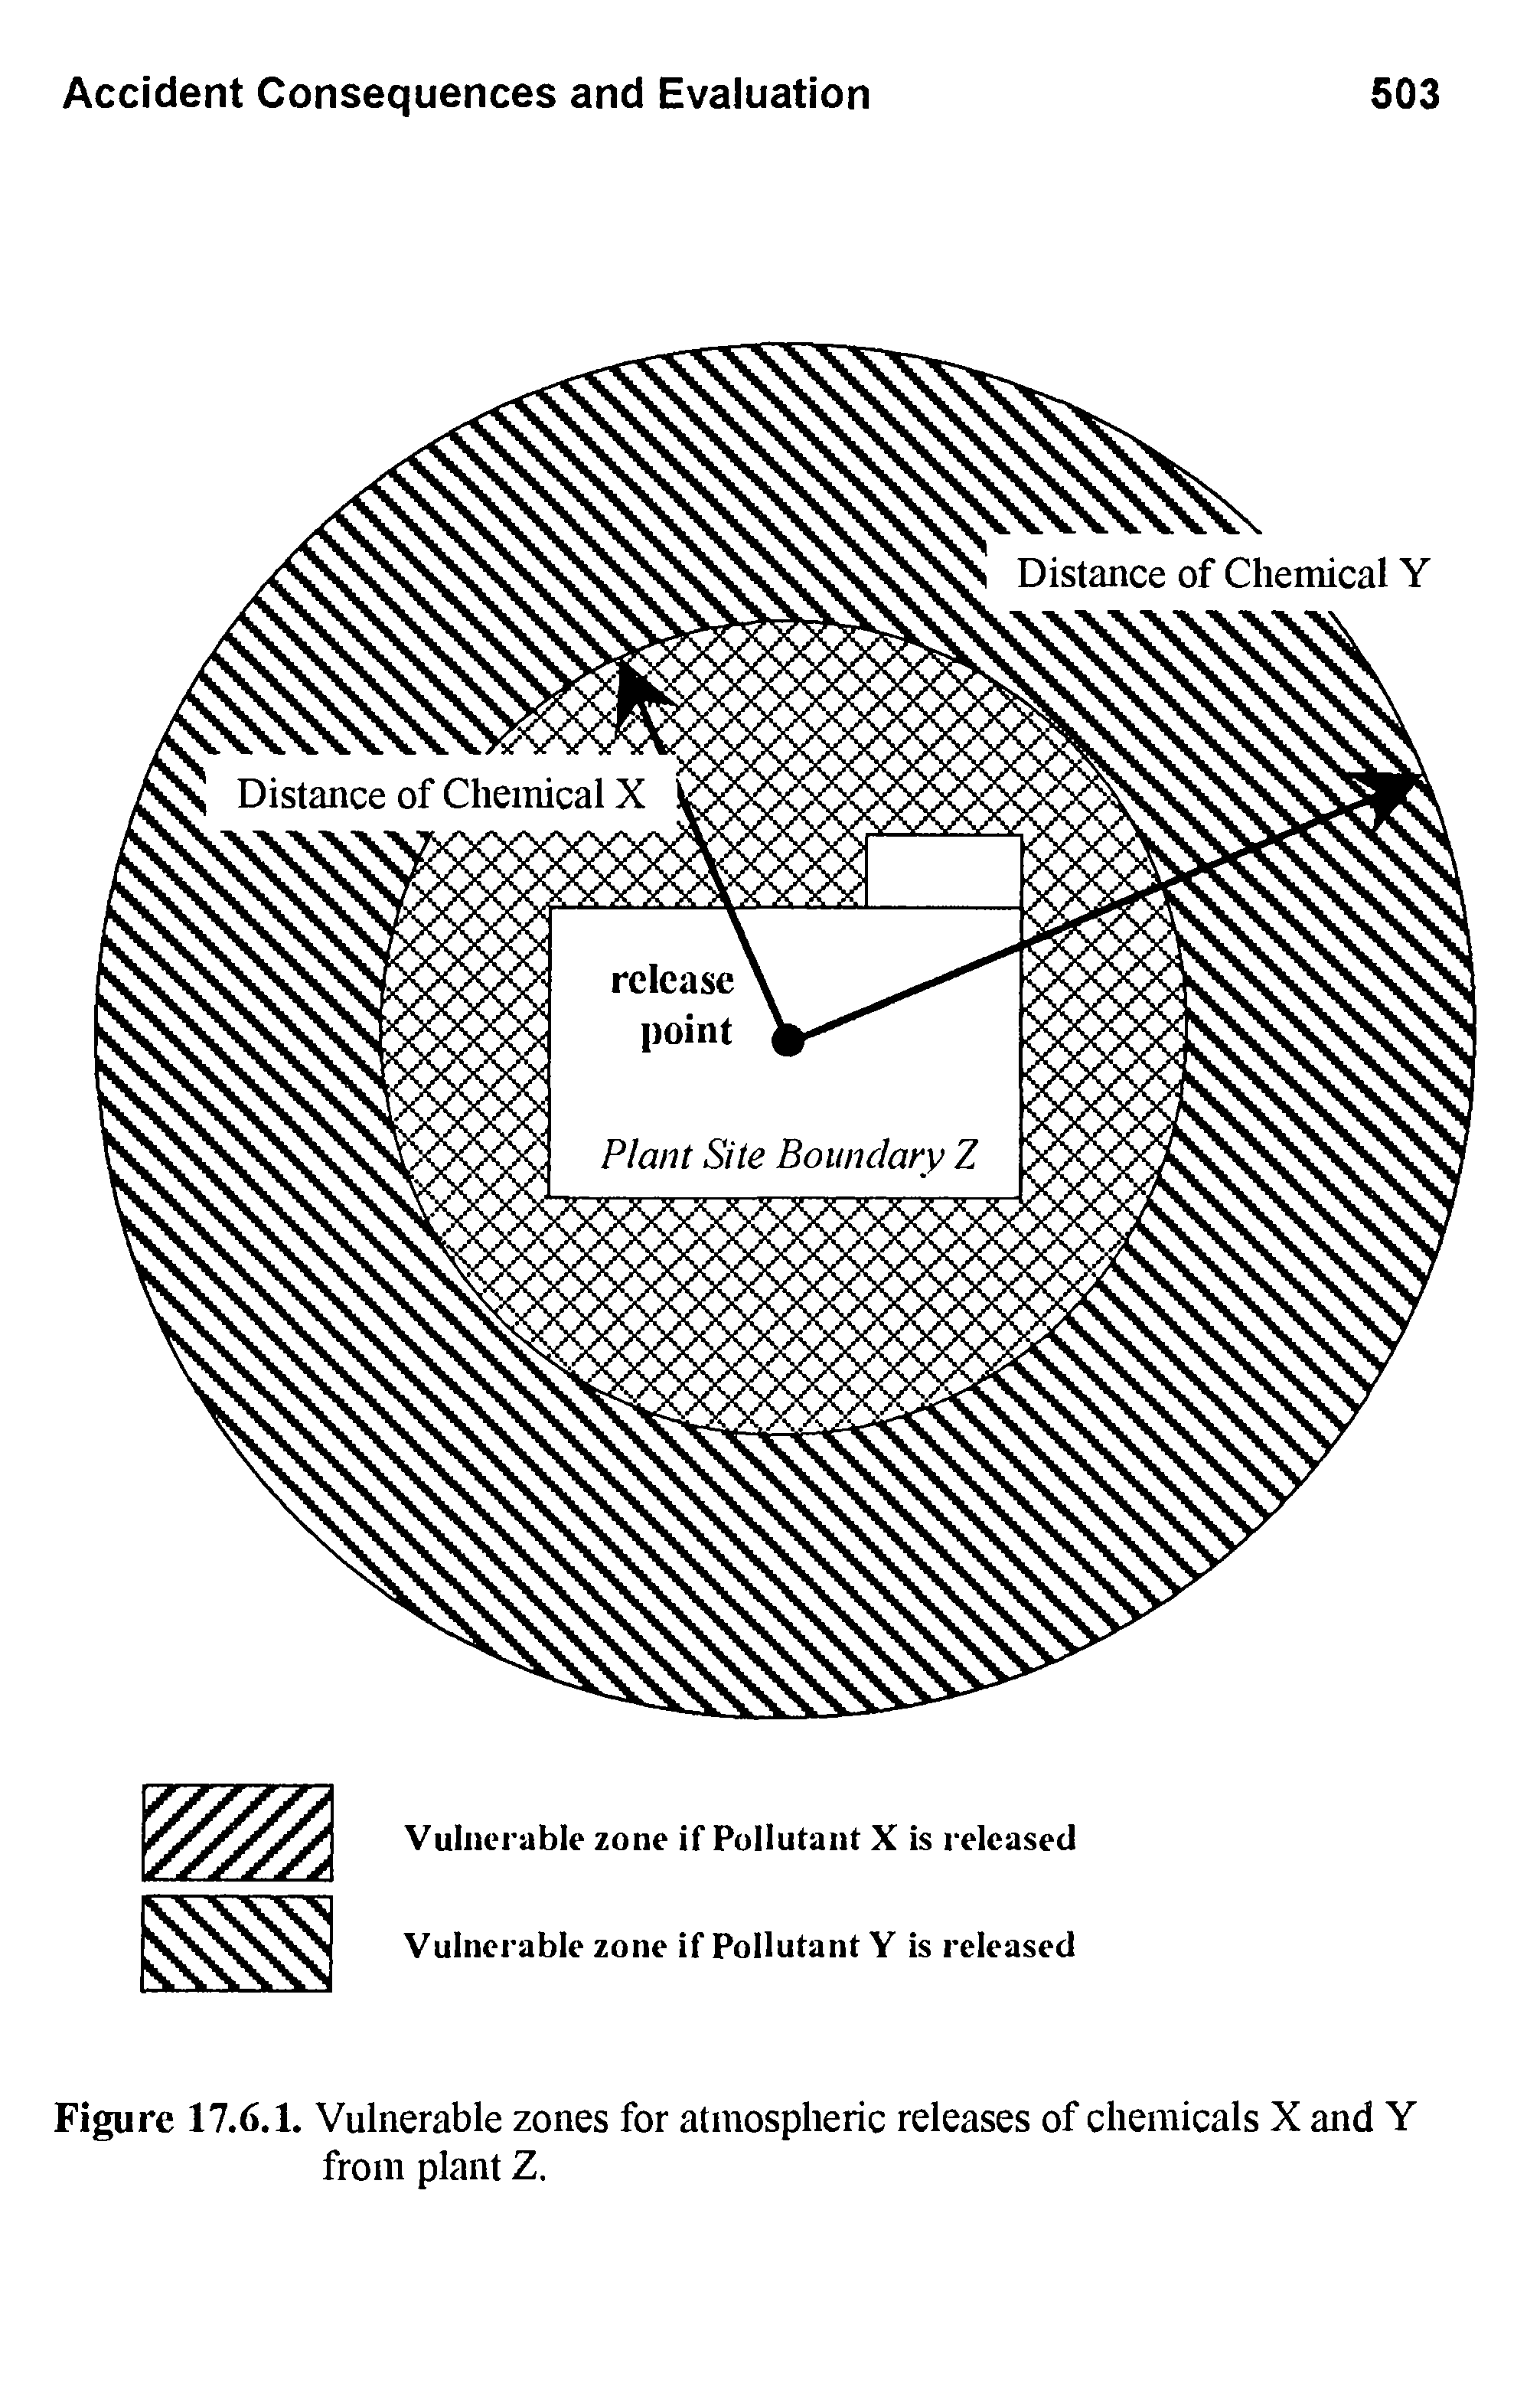 Figure 17.6.1. Vulnerable zones for atmospheric releases of chemicals X and Y from plant Z.